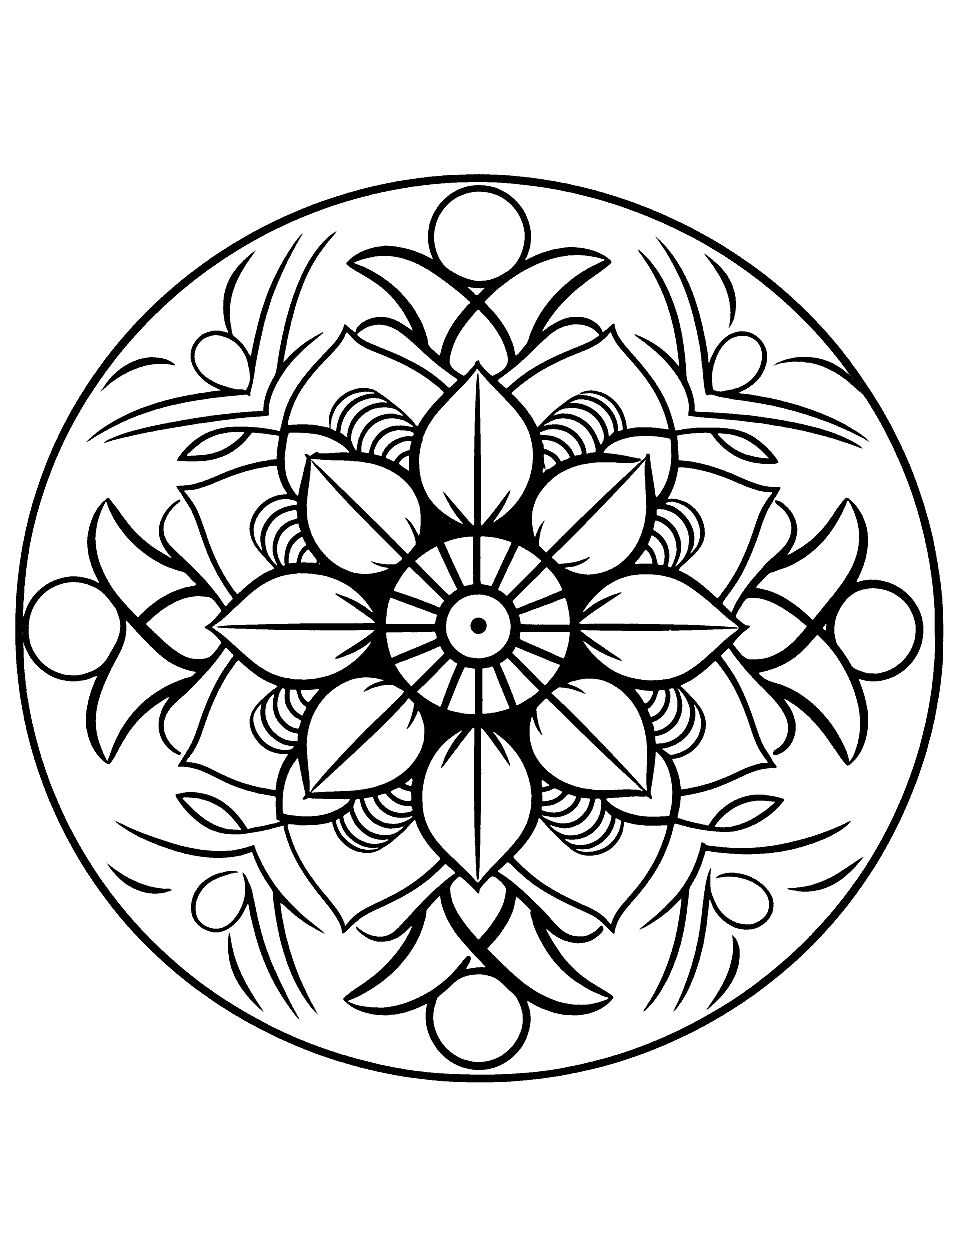 Blossoming Tree Mandala Coloring Page - A mandala featuring a large, blossoming tree at its center, surrounded by garden elements and other plants.